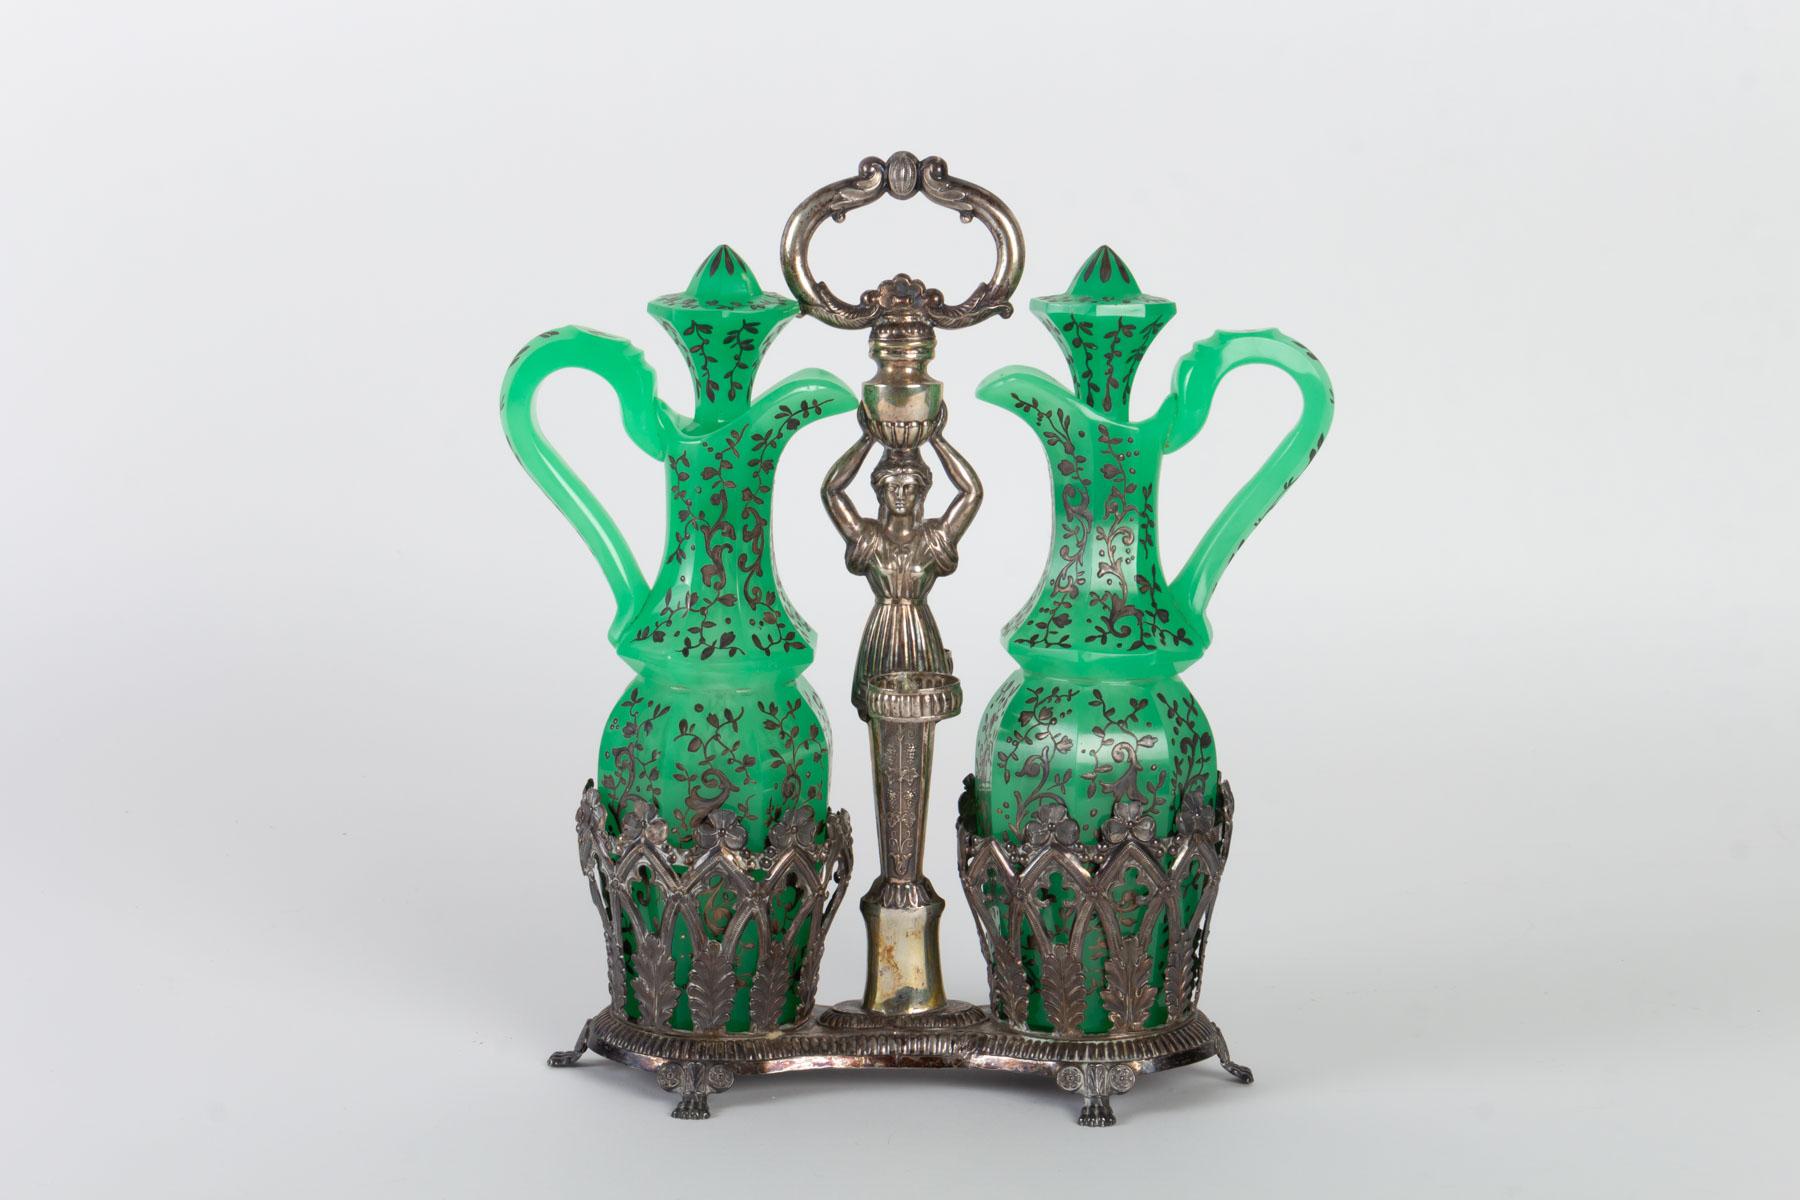 Oil and vinegar in green opaline and enameled gold in its silver support, 19th century, Napoléon III period
Measures: H 26cm, L 24cm, P 8cm.